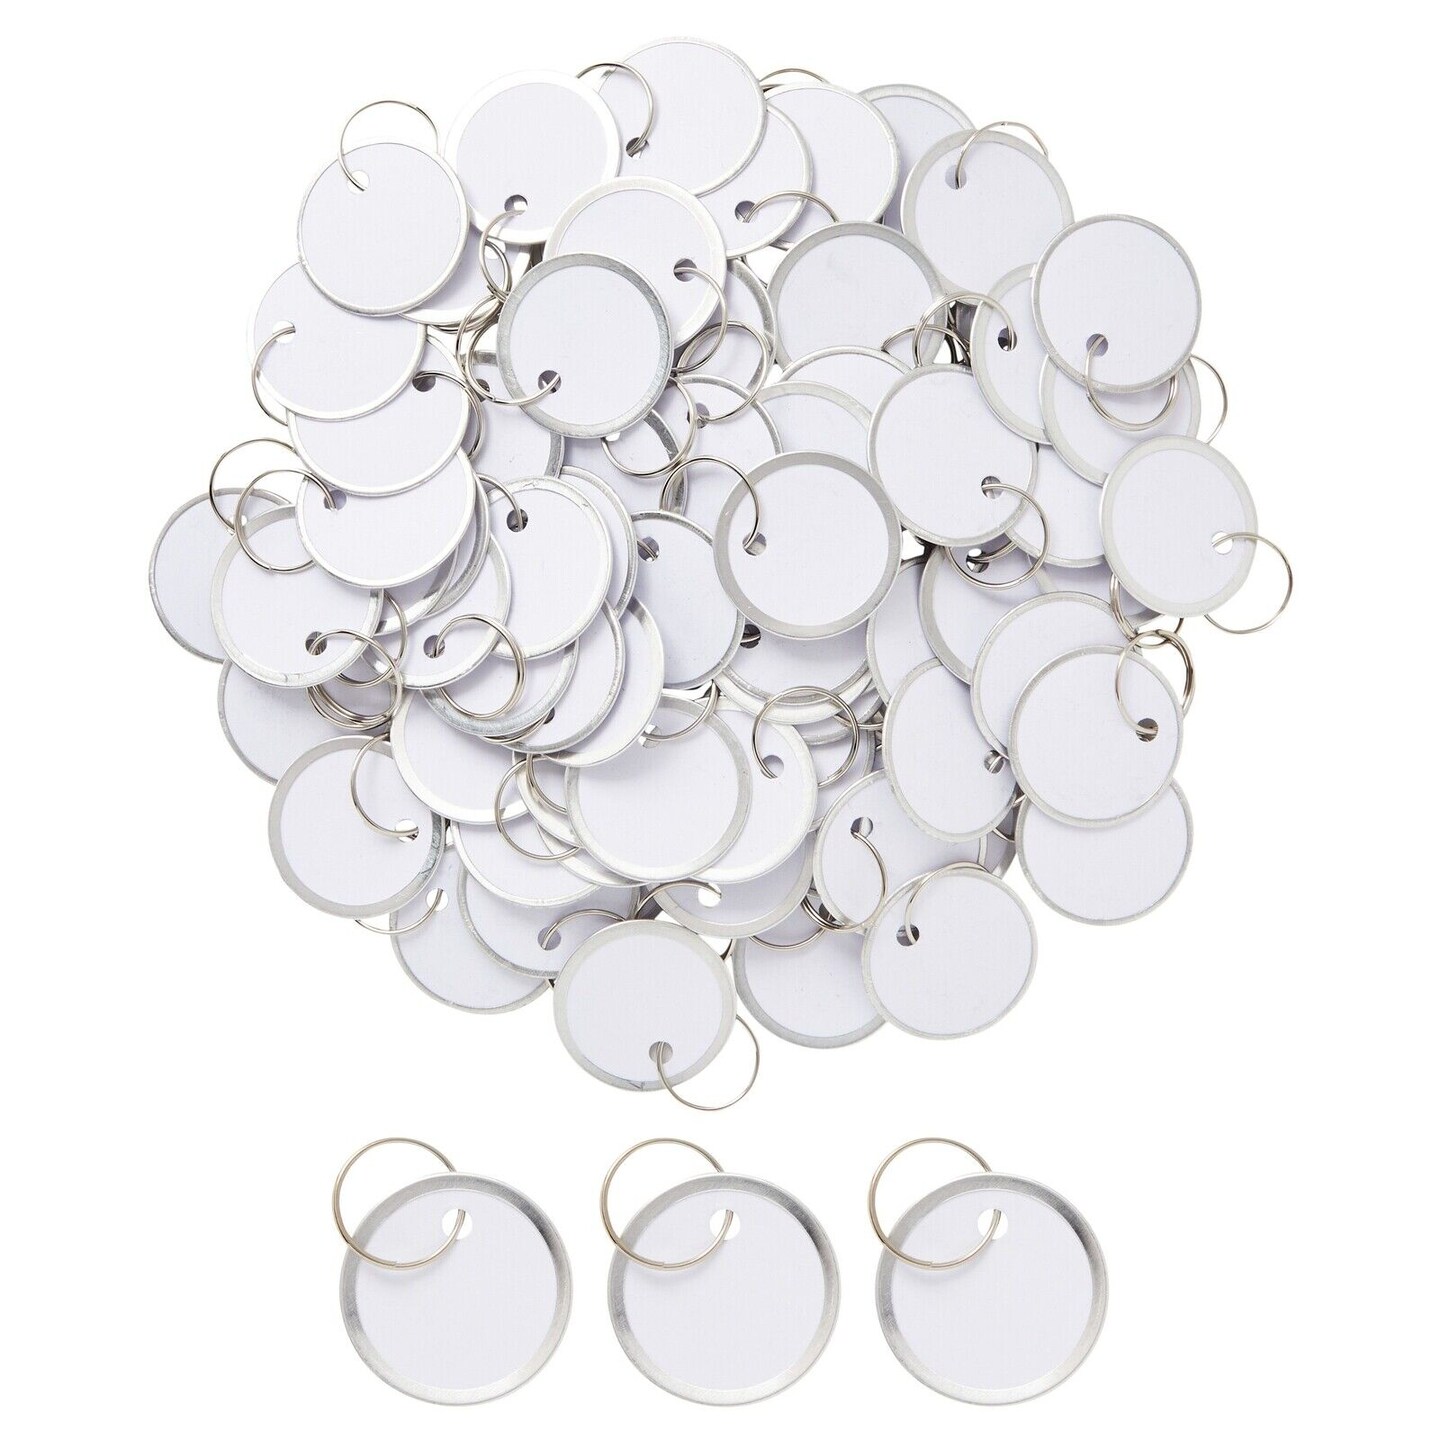 100-Pack 1.2 inch Blank Paper Key Label Tags with Metal Rimmed Rings